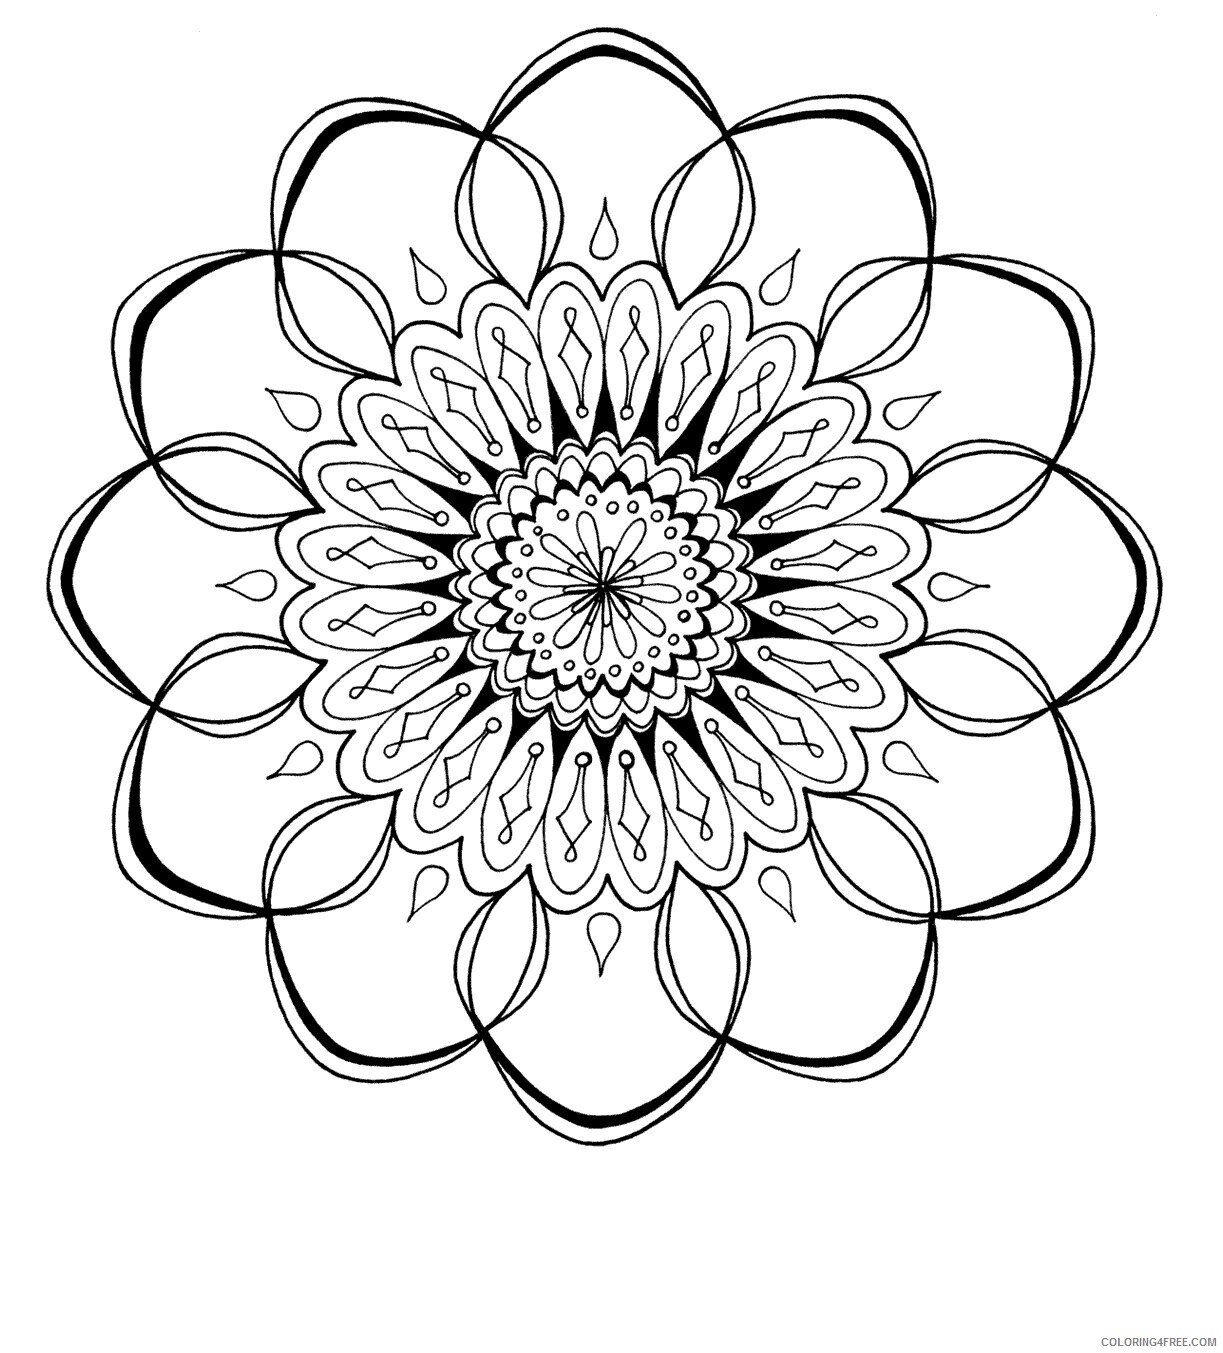 Awesome Design Mandala Coloring Pages Free Printable Sheets Free 2021 a 4299 Coloring4free